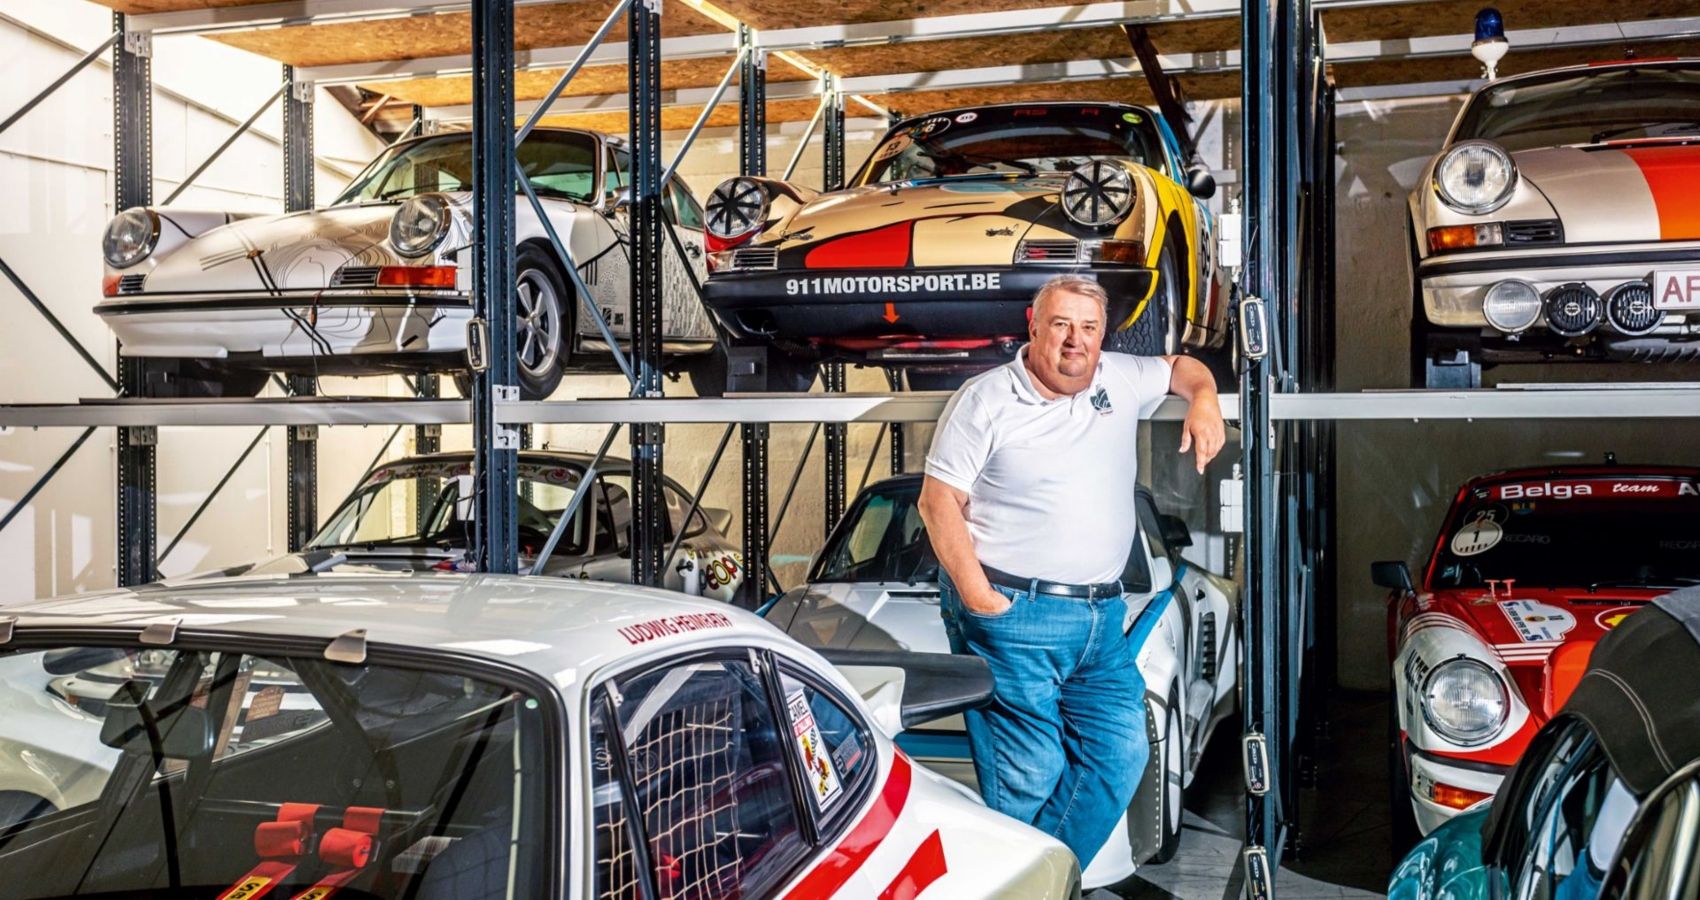 This Is The Most Impressive Rare Porsche Collection And It’s All About Quality